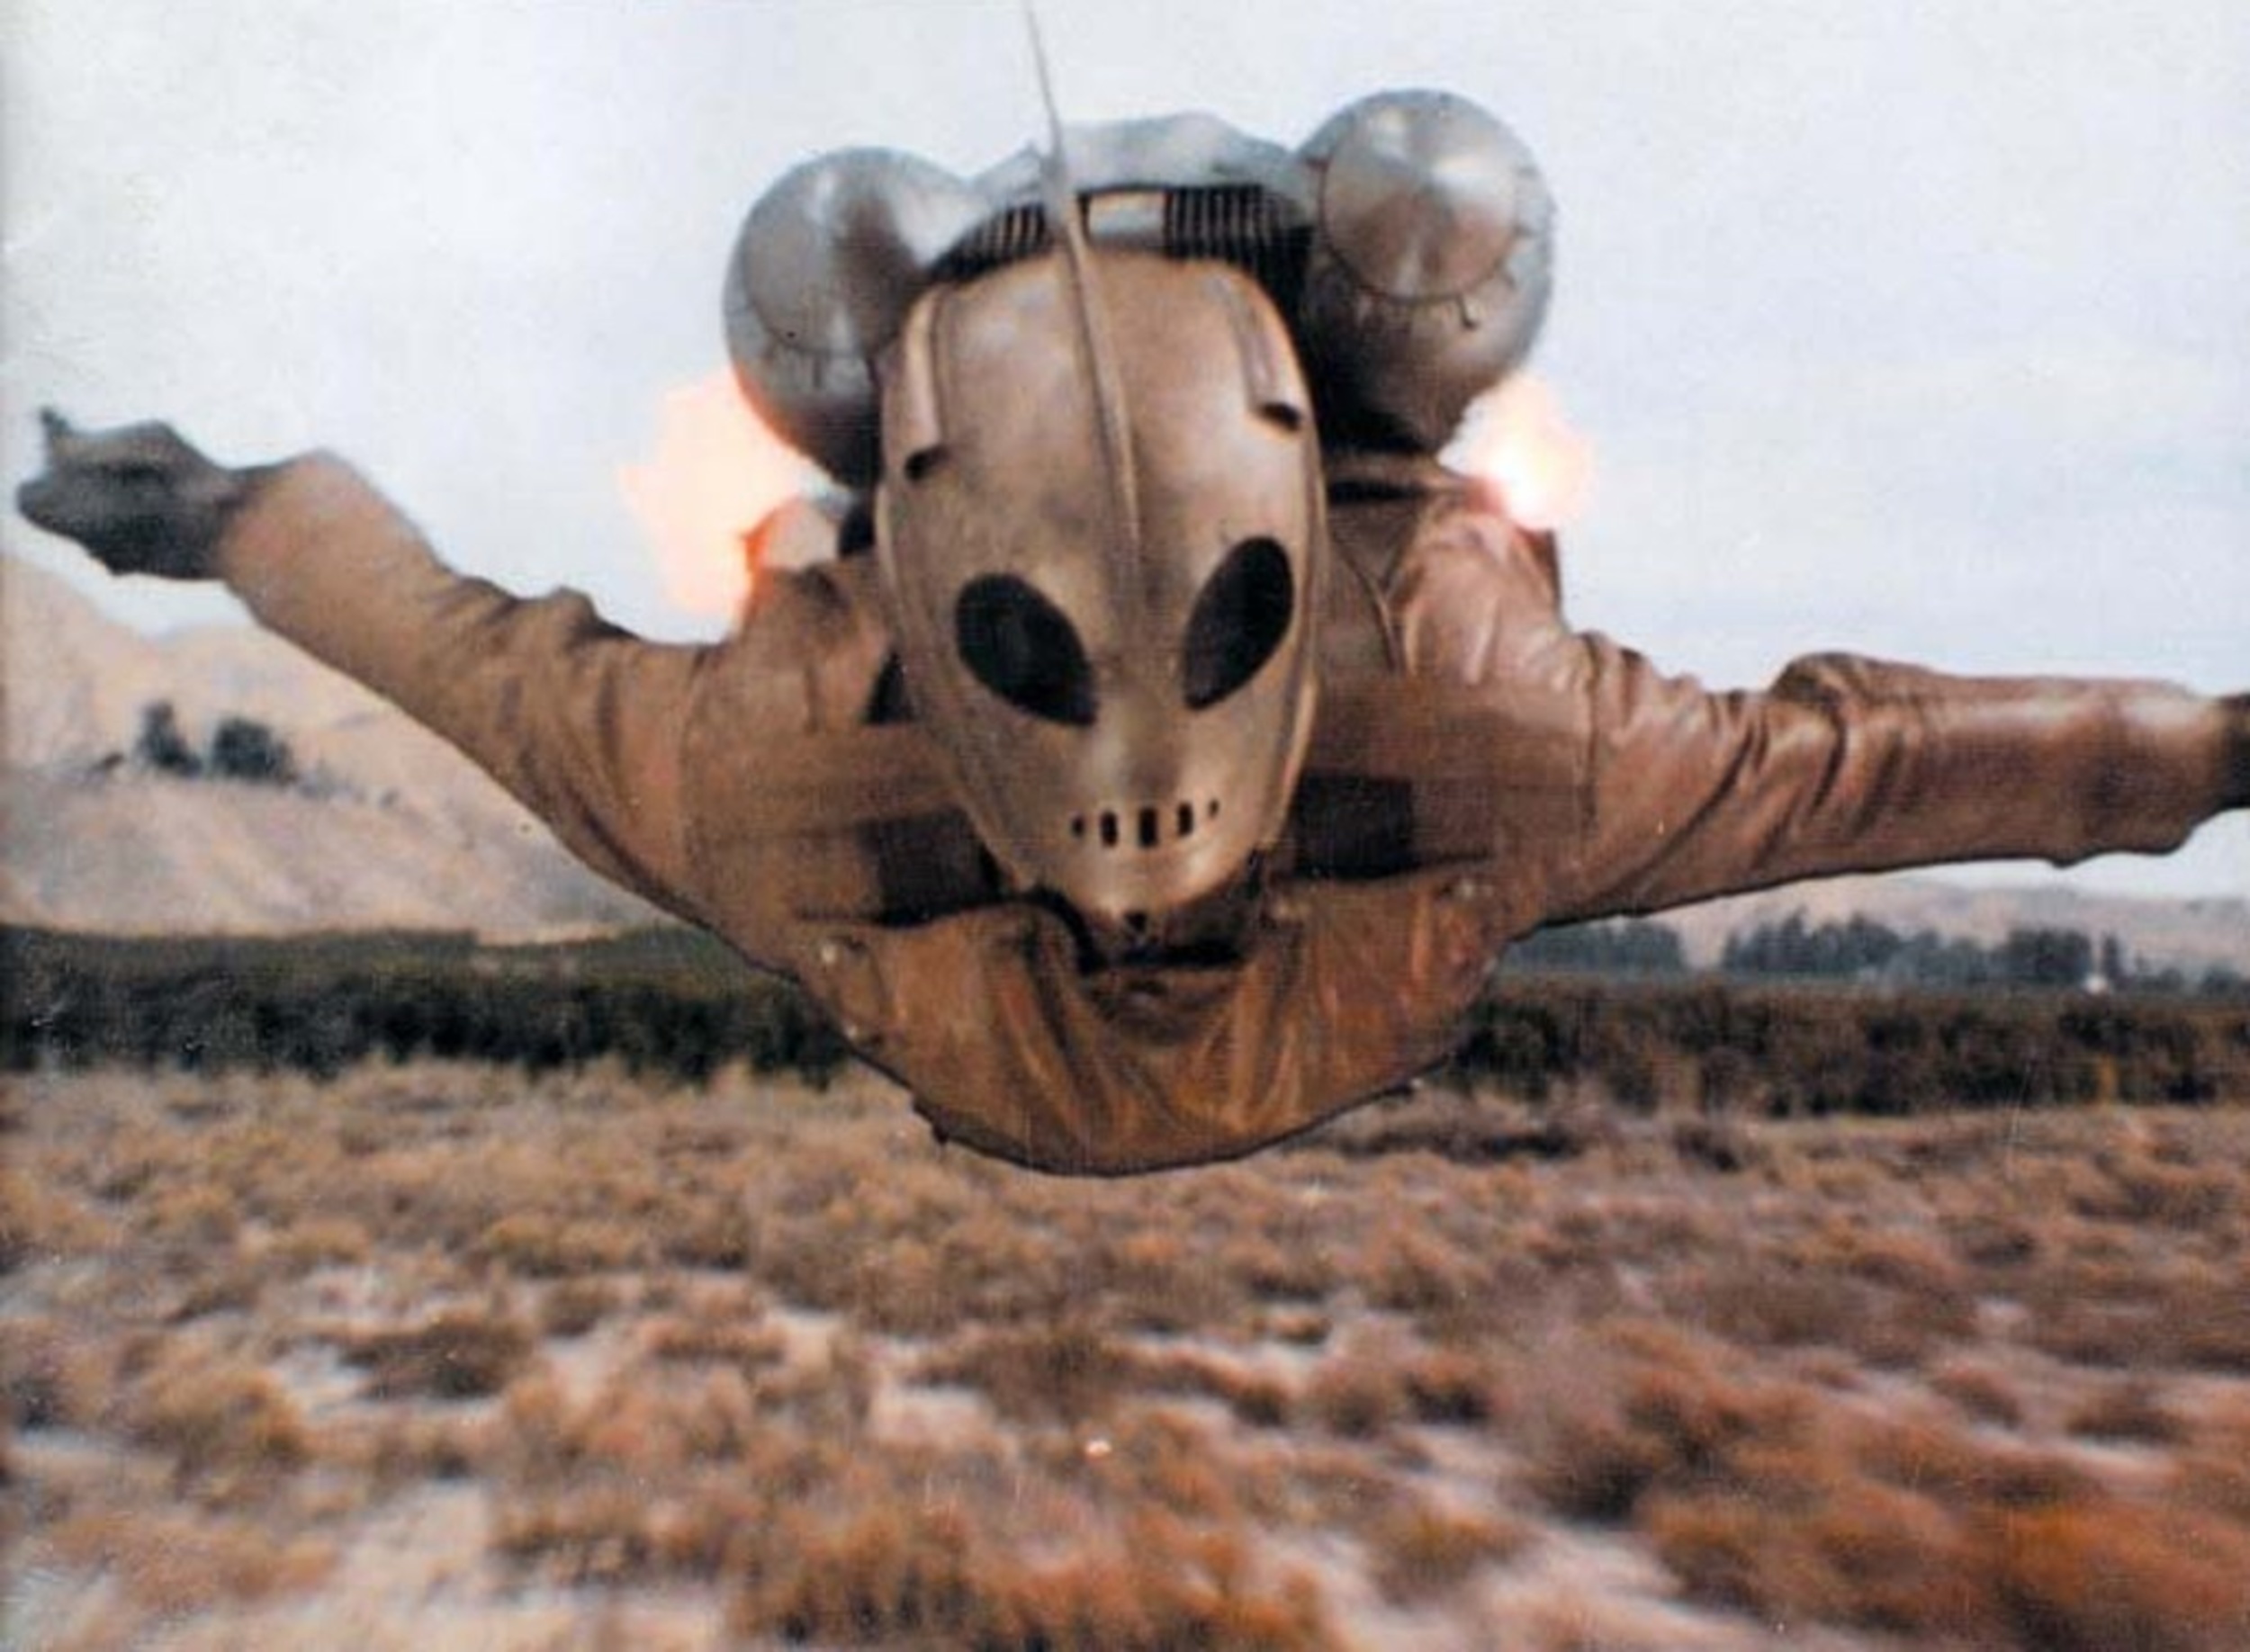 <p>Well, the Rocketeer, the semi-superhero from this throwback flick, uses a jetpack to fly, so he’s kind of a pilot. However, the man in the mask, Cliff Secord, is a stunt pilot for a living before he gets his hands on the experimental flying device. “The Rocketeer” didn’t get a lot of love when it came out, but since then has been reconsidered as a fun, fresh action film.</p><p>You may also like: <a href='https://www.yardbarker.com/entertainment/articles/20_facts_you_might_not_know_about_pulp_fiction_031924/s1__35170955'>20 facts you might not know about 'Pulp Fiction'</a></p>